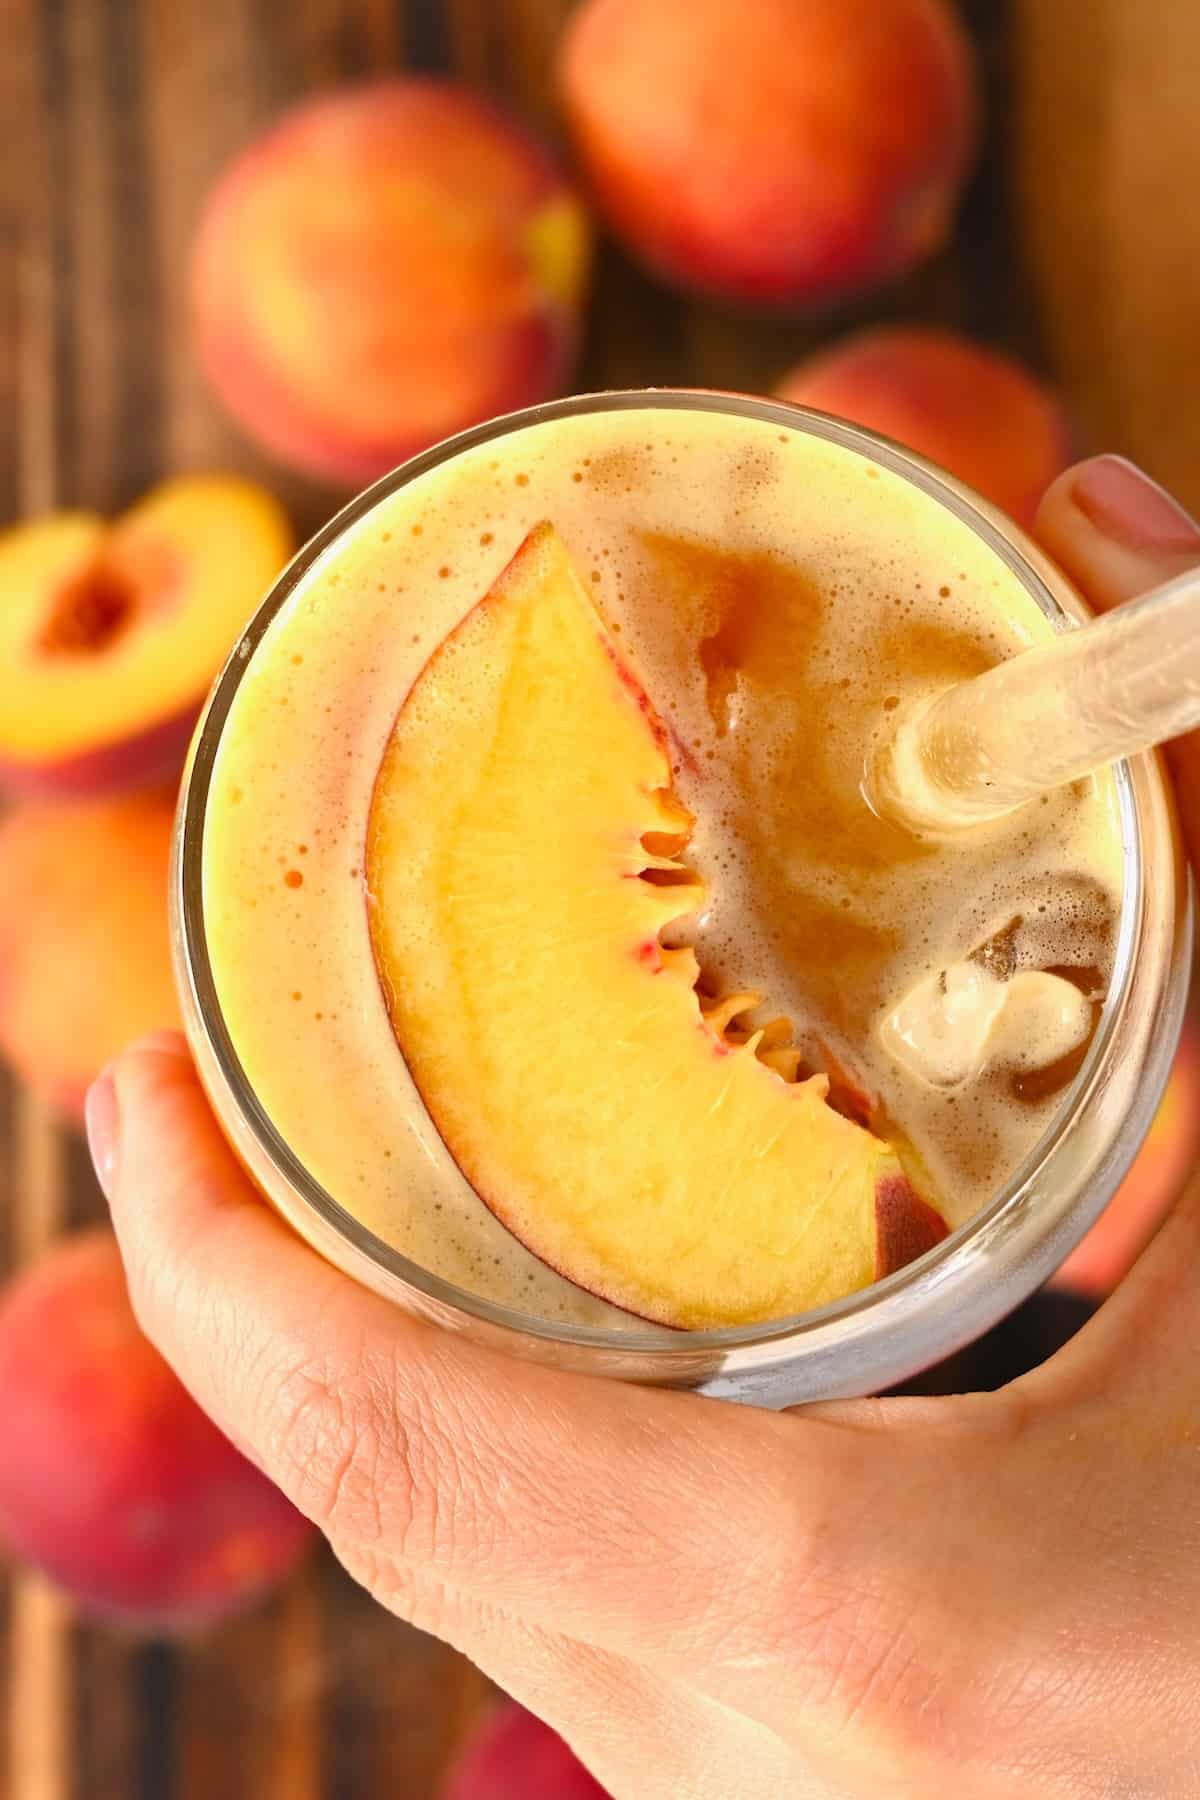 Top view of a glass with peach juice topped with a peach slice